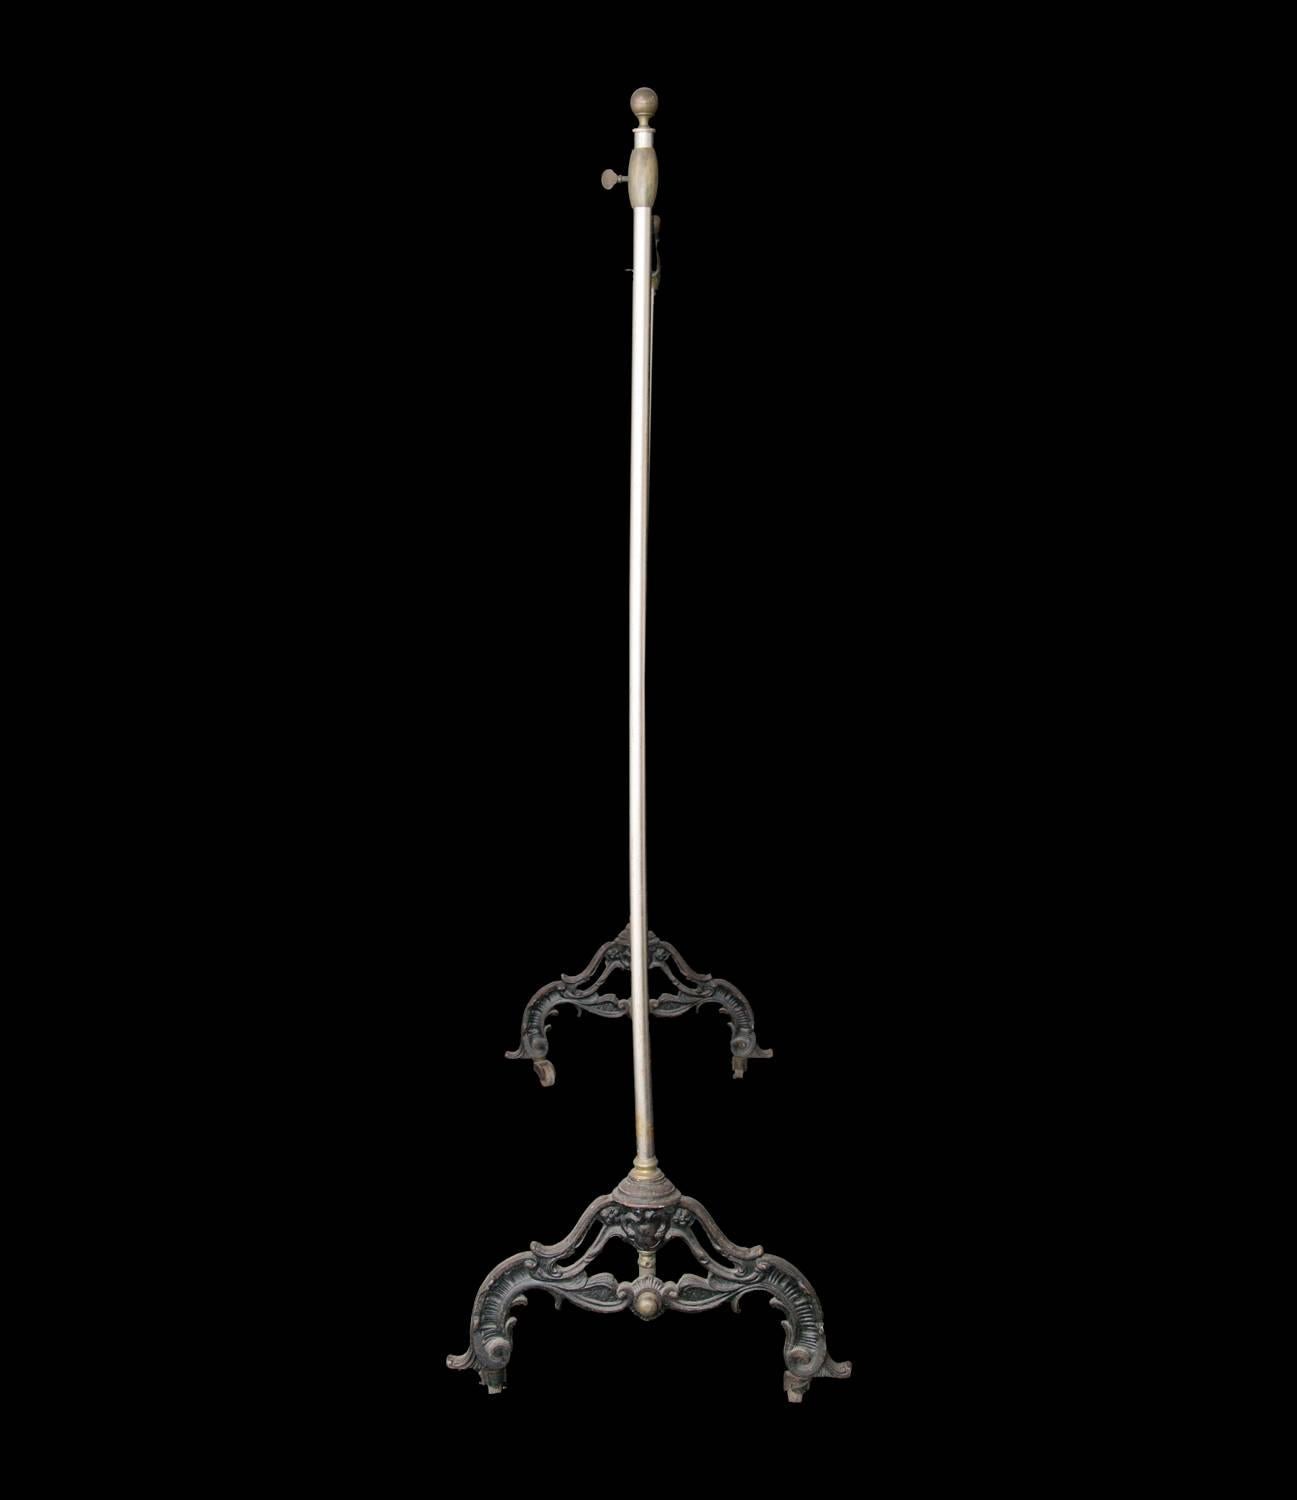 Fabulous antique shop coat rack with intricate cast iron base. Perfect for unique retail displays or in a domestic setting.